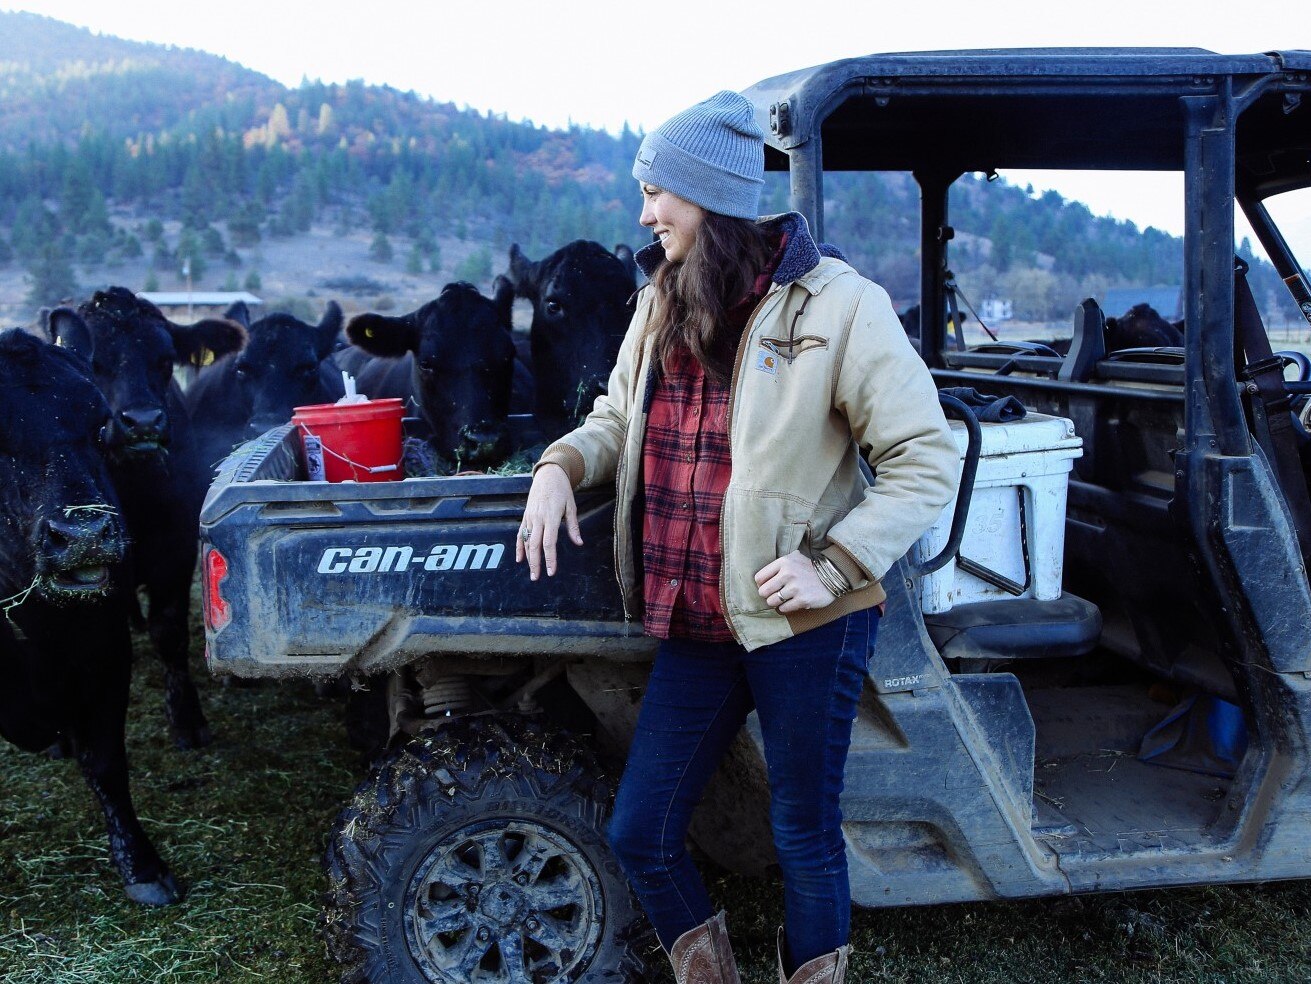 Mary Heffernan leaning on the box of her Defender in a field surrounded by black cows 